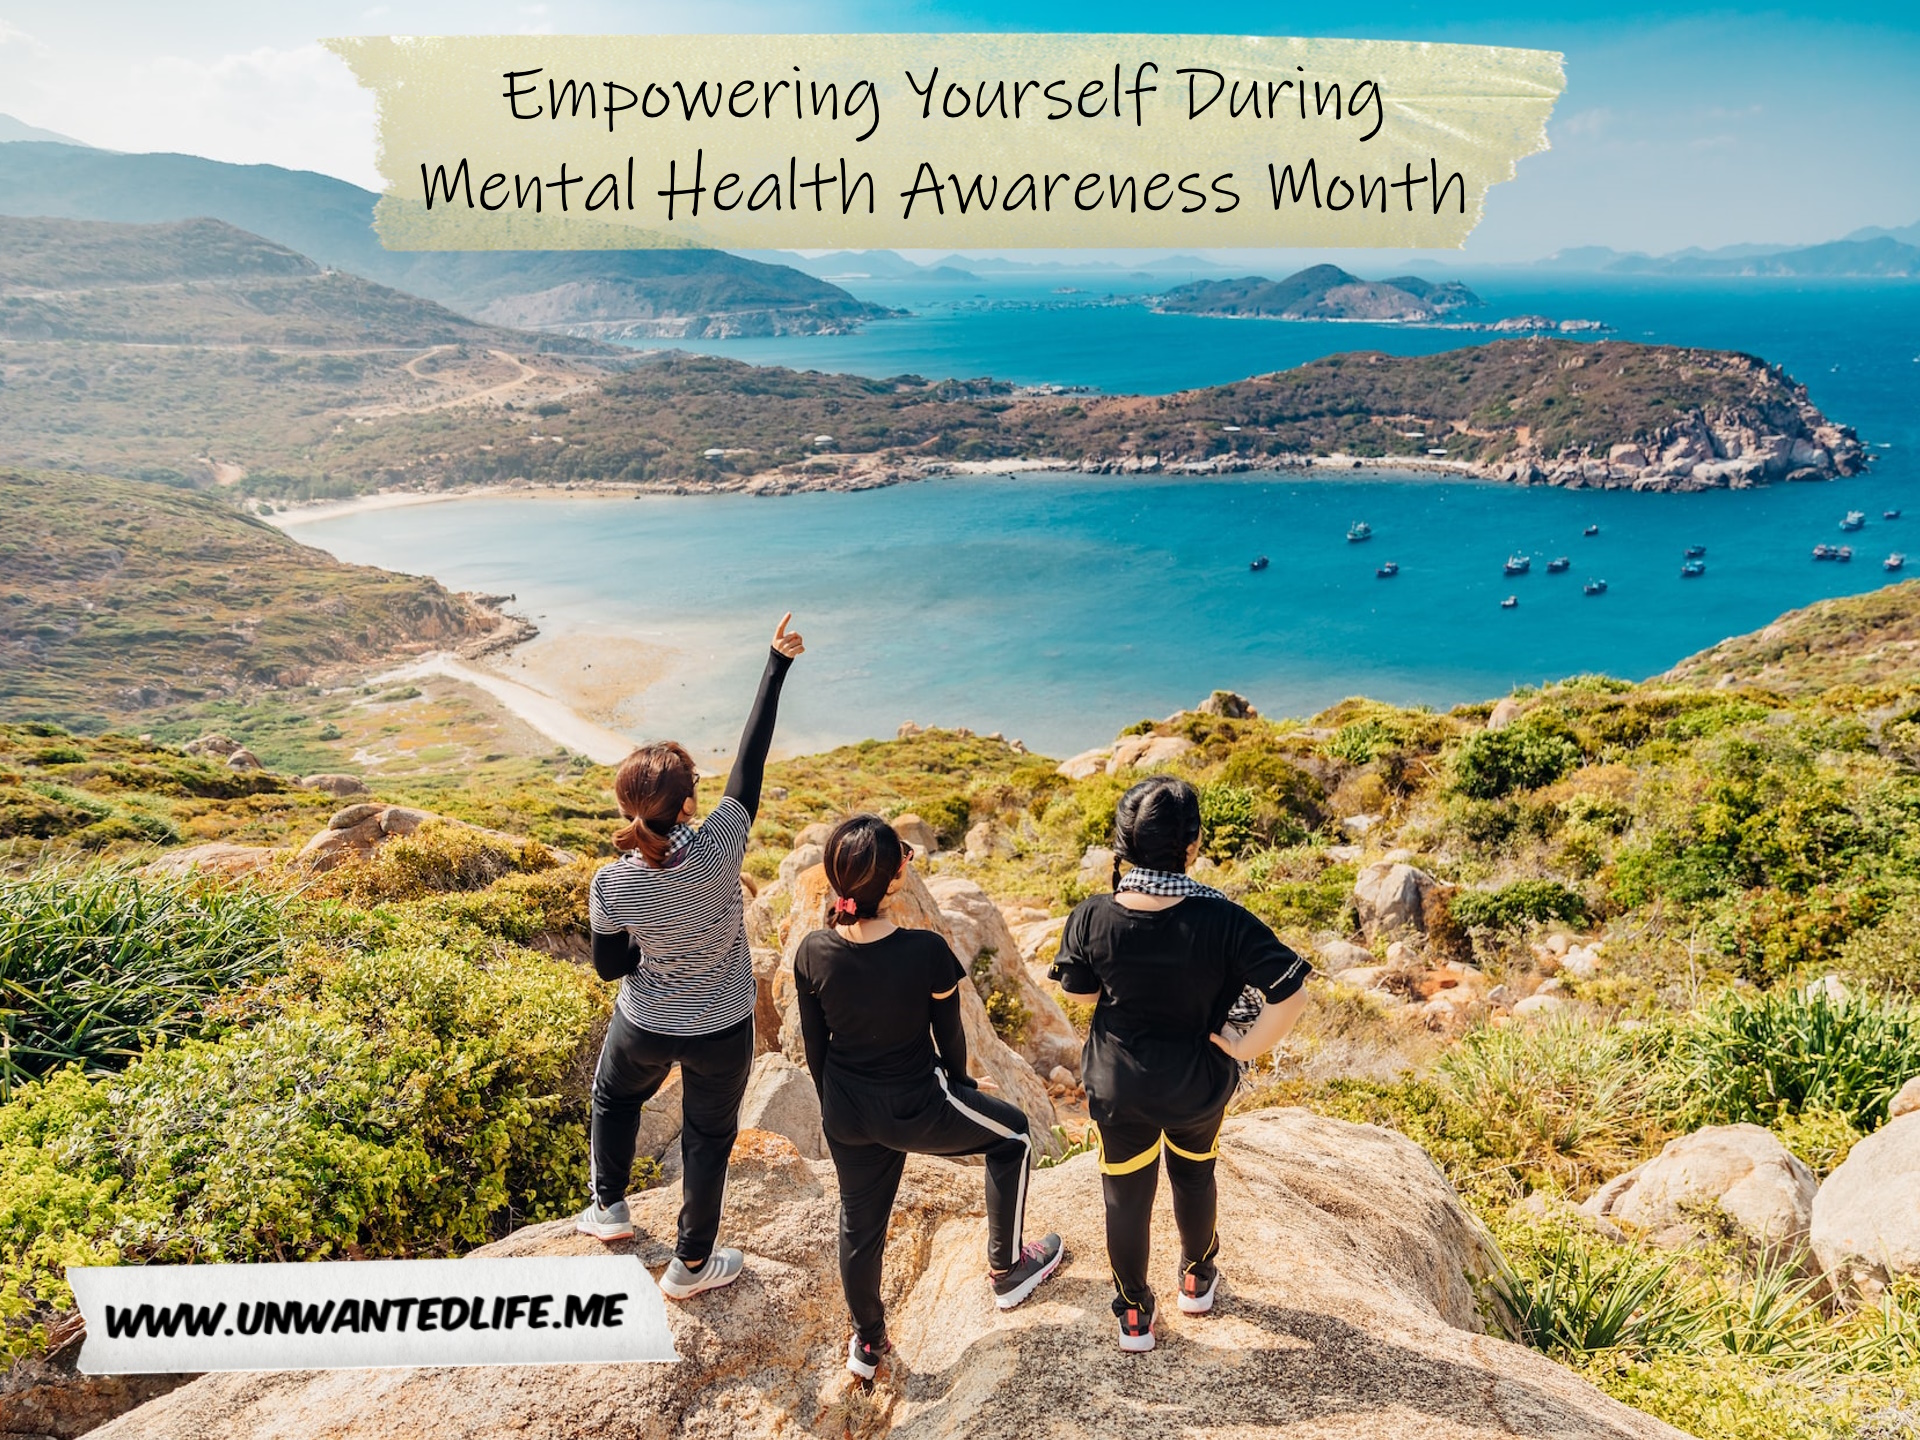 A group of three women overlooking a scenic view from a hill to represent the topic of the article - Empowering Yourself During Mental Health Awareness Month